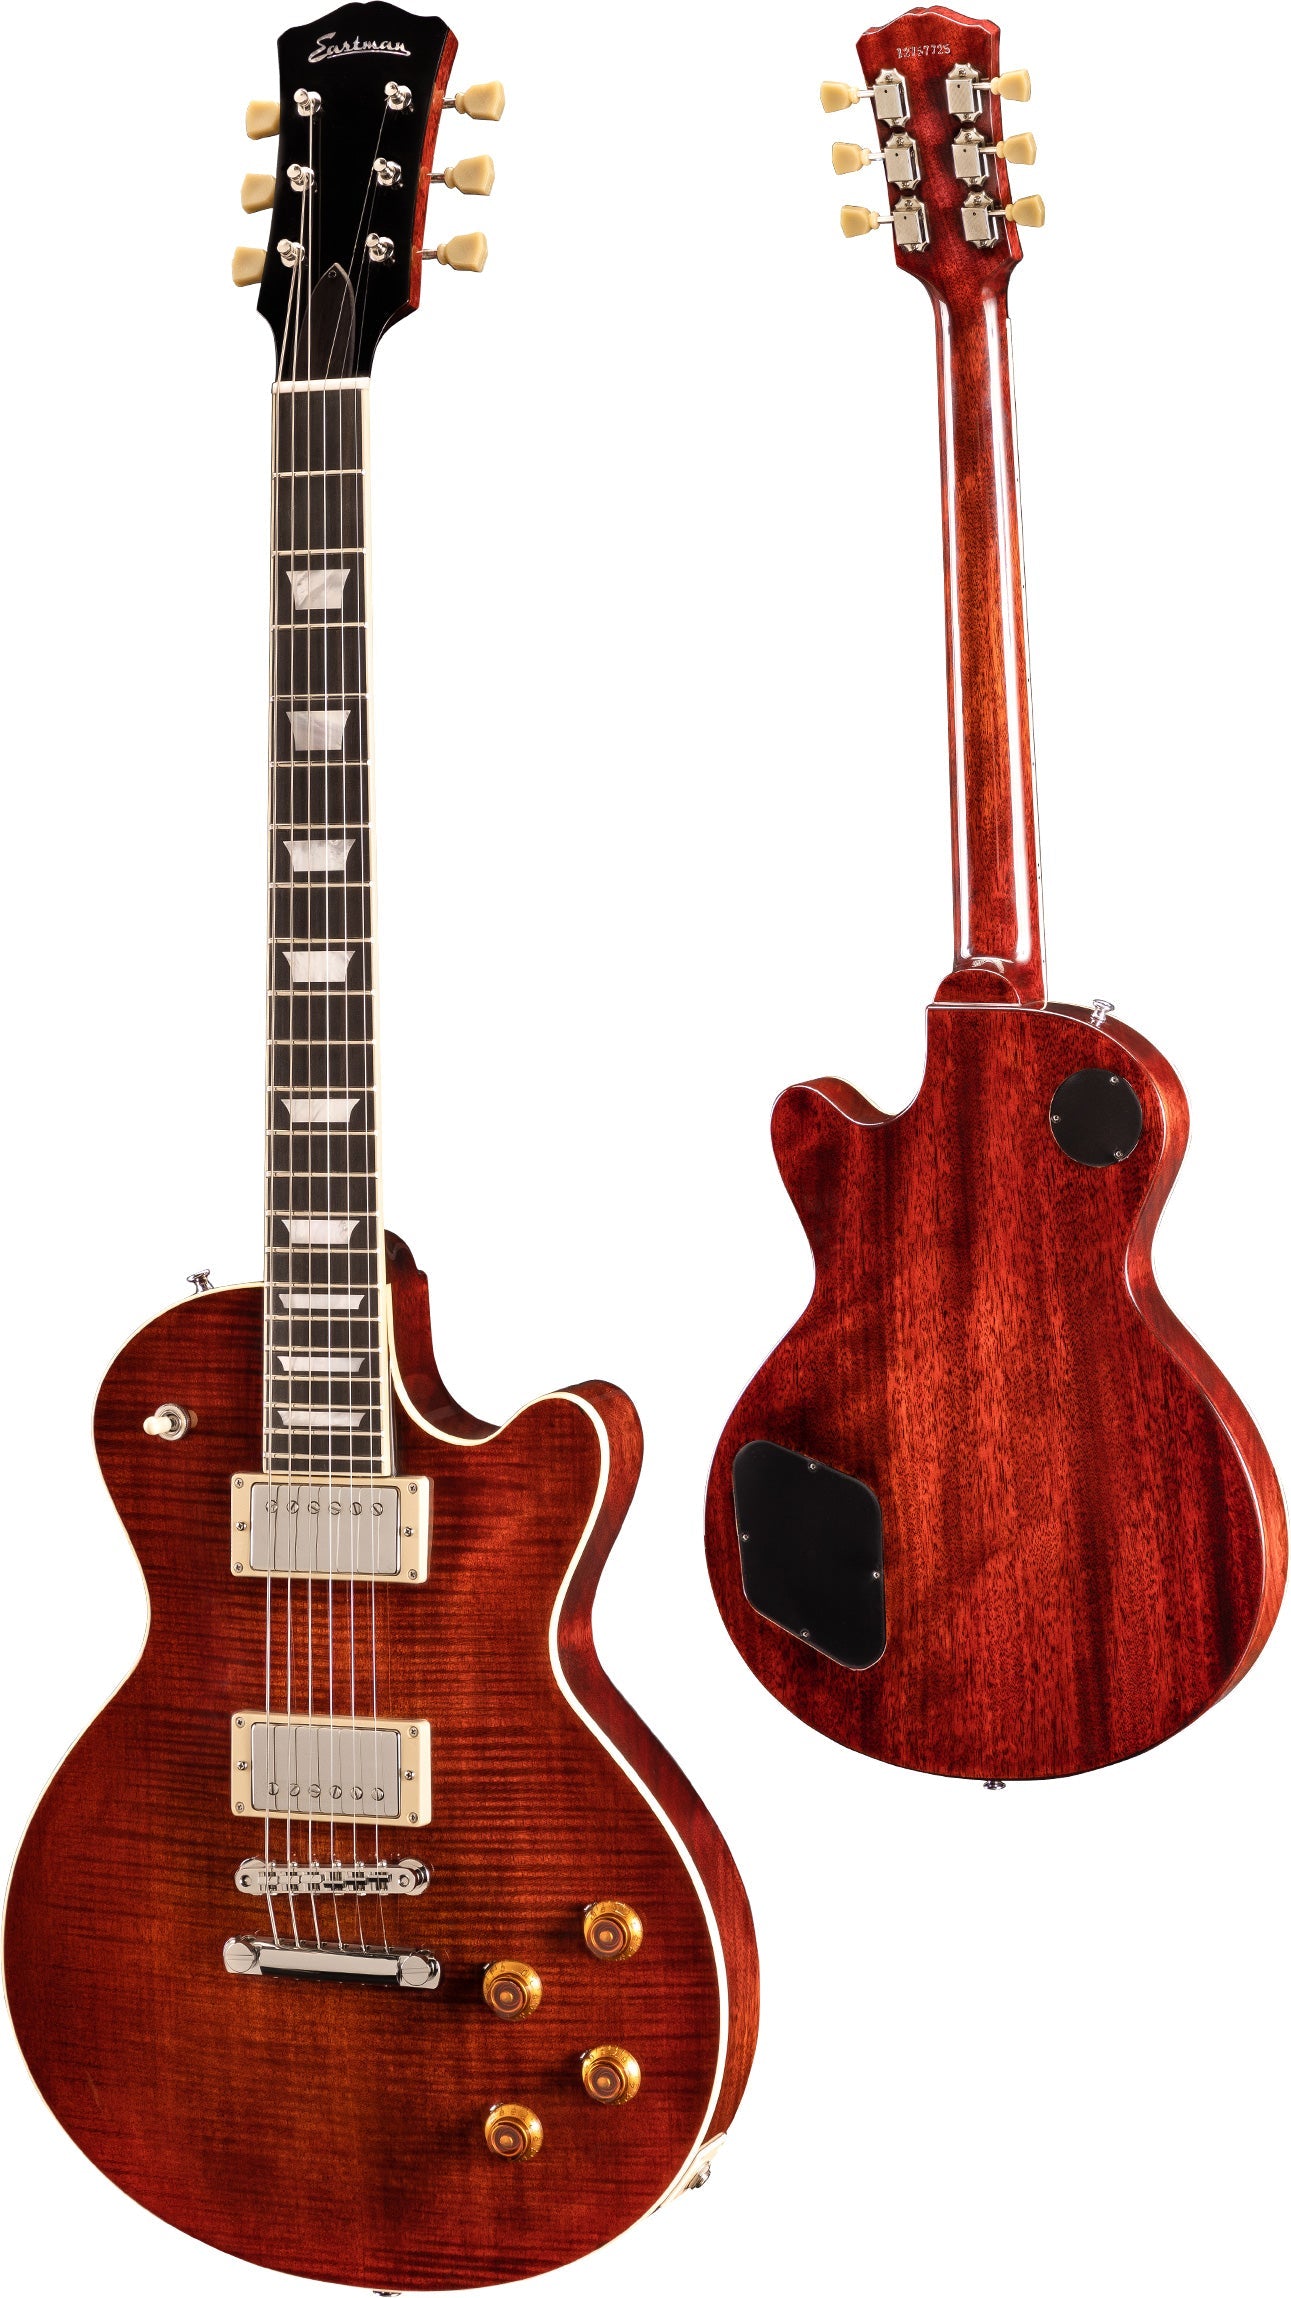 Eastman SB59 Electric Guitar Clasicc, Electric Guitar for sale at Richards Guitars.